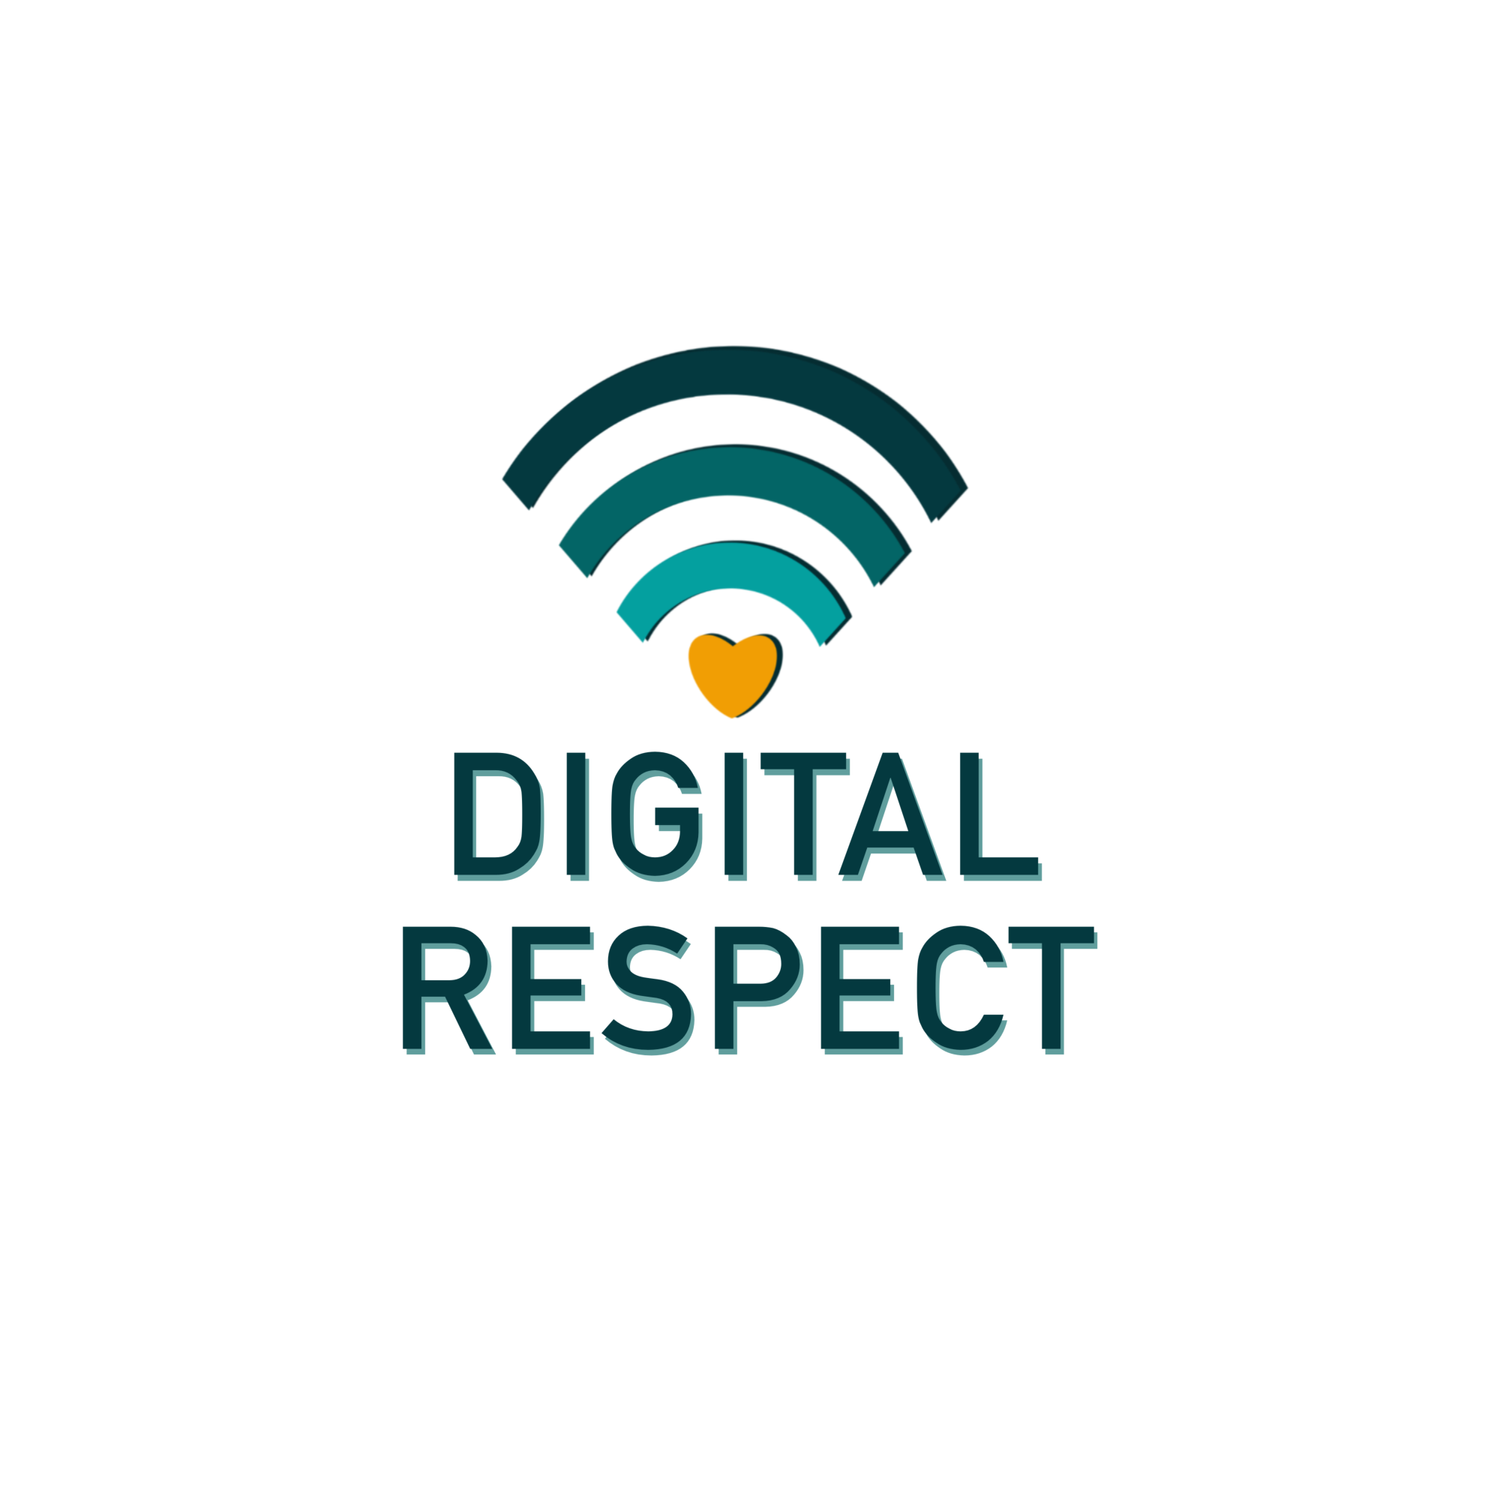 Digital Respect: Your digital soft skills and online safety solution